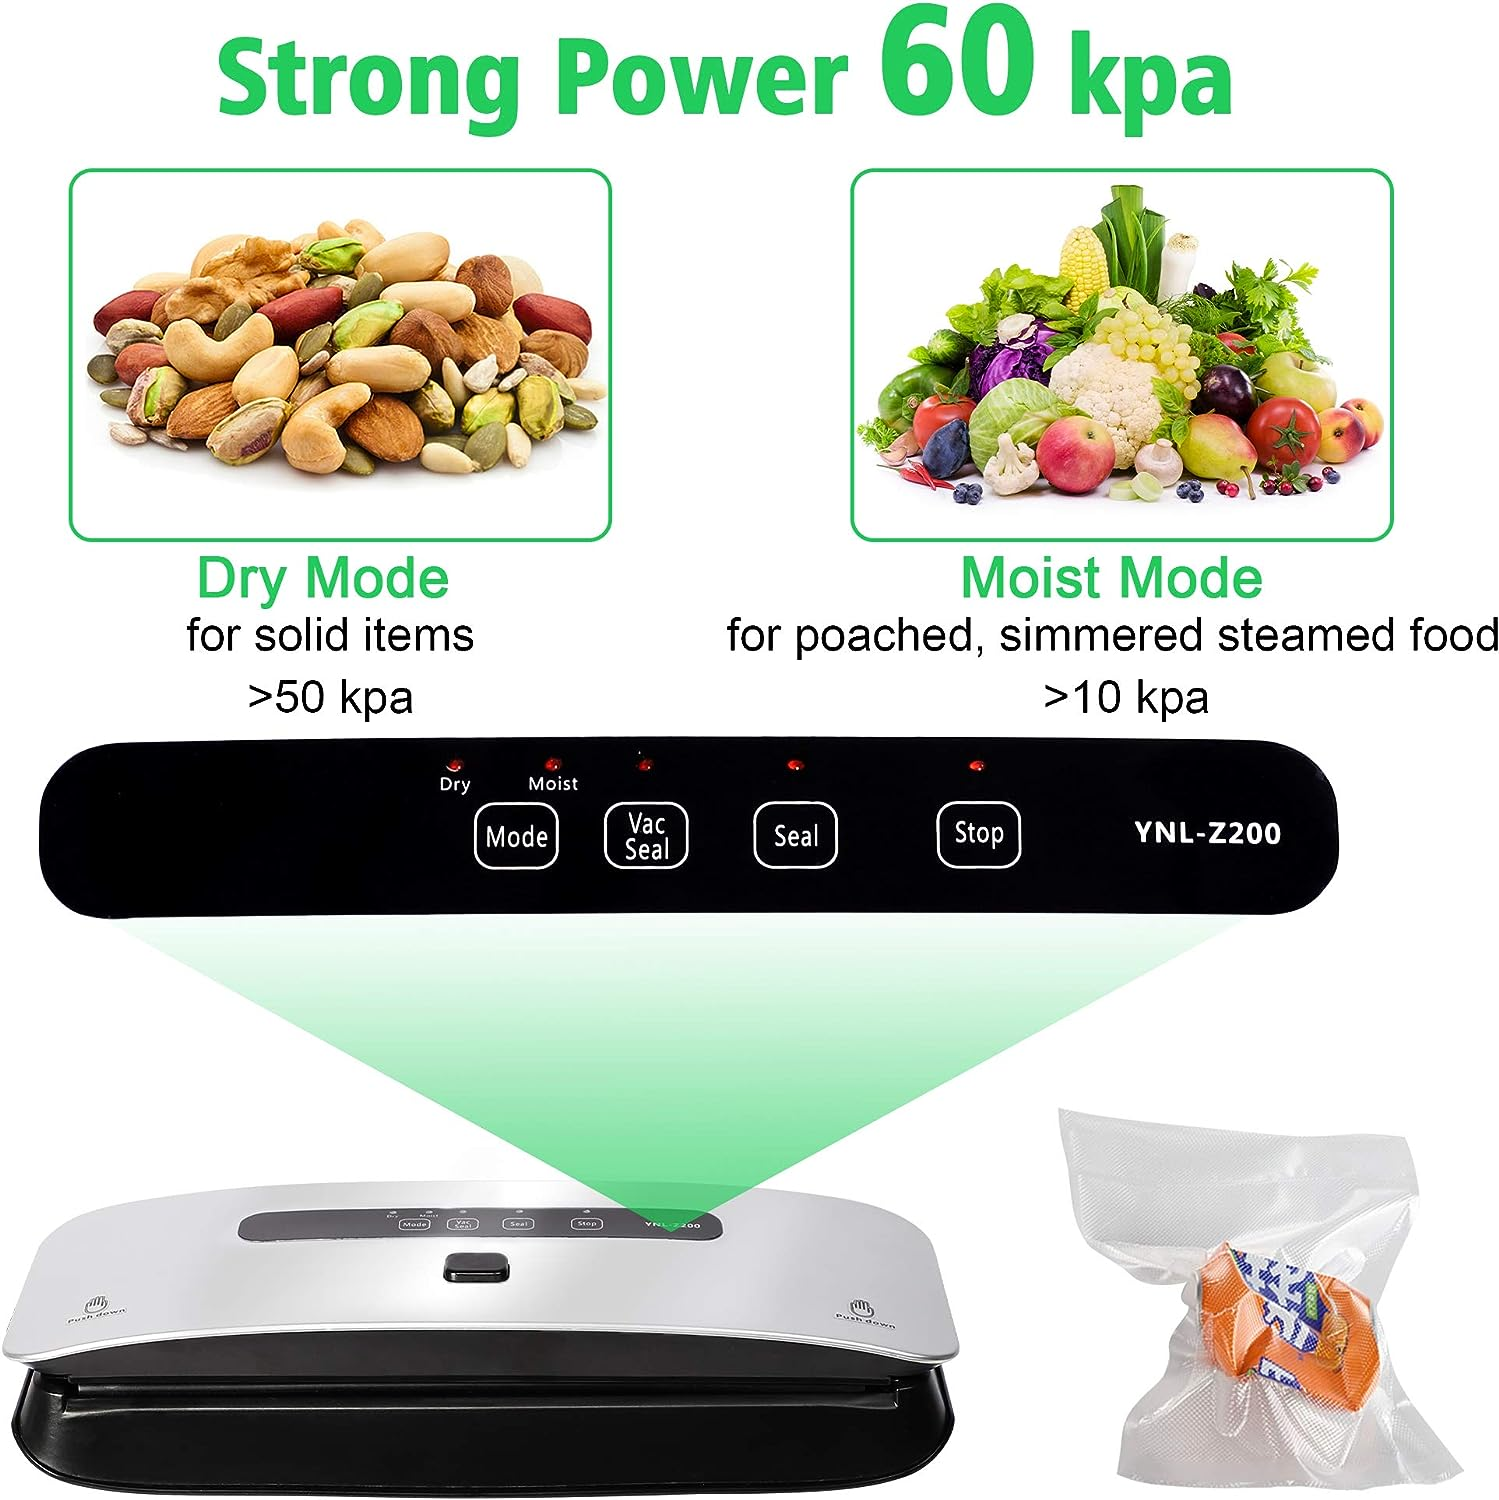 E-Macht Food Vacuum Sealer Machine Strong Suction Power Dry and Moist Mode Starter Kit for Food Preservation and Sous Vide